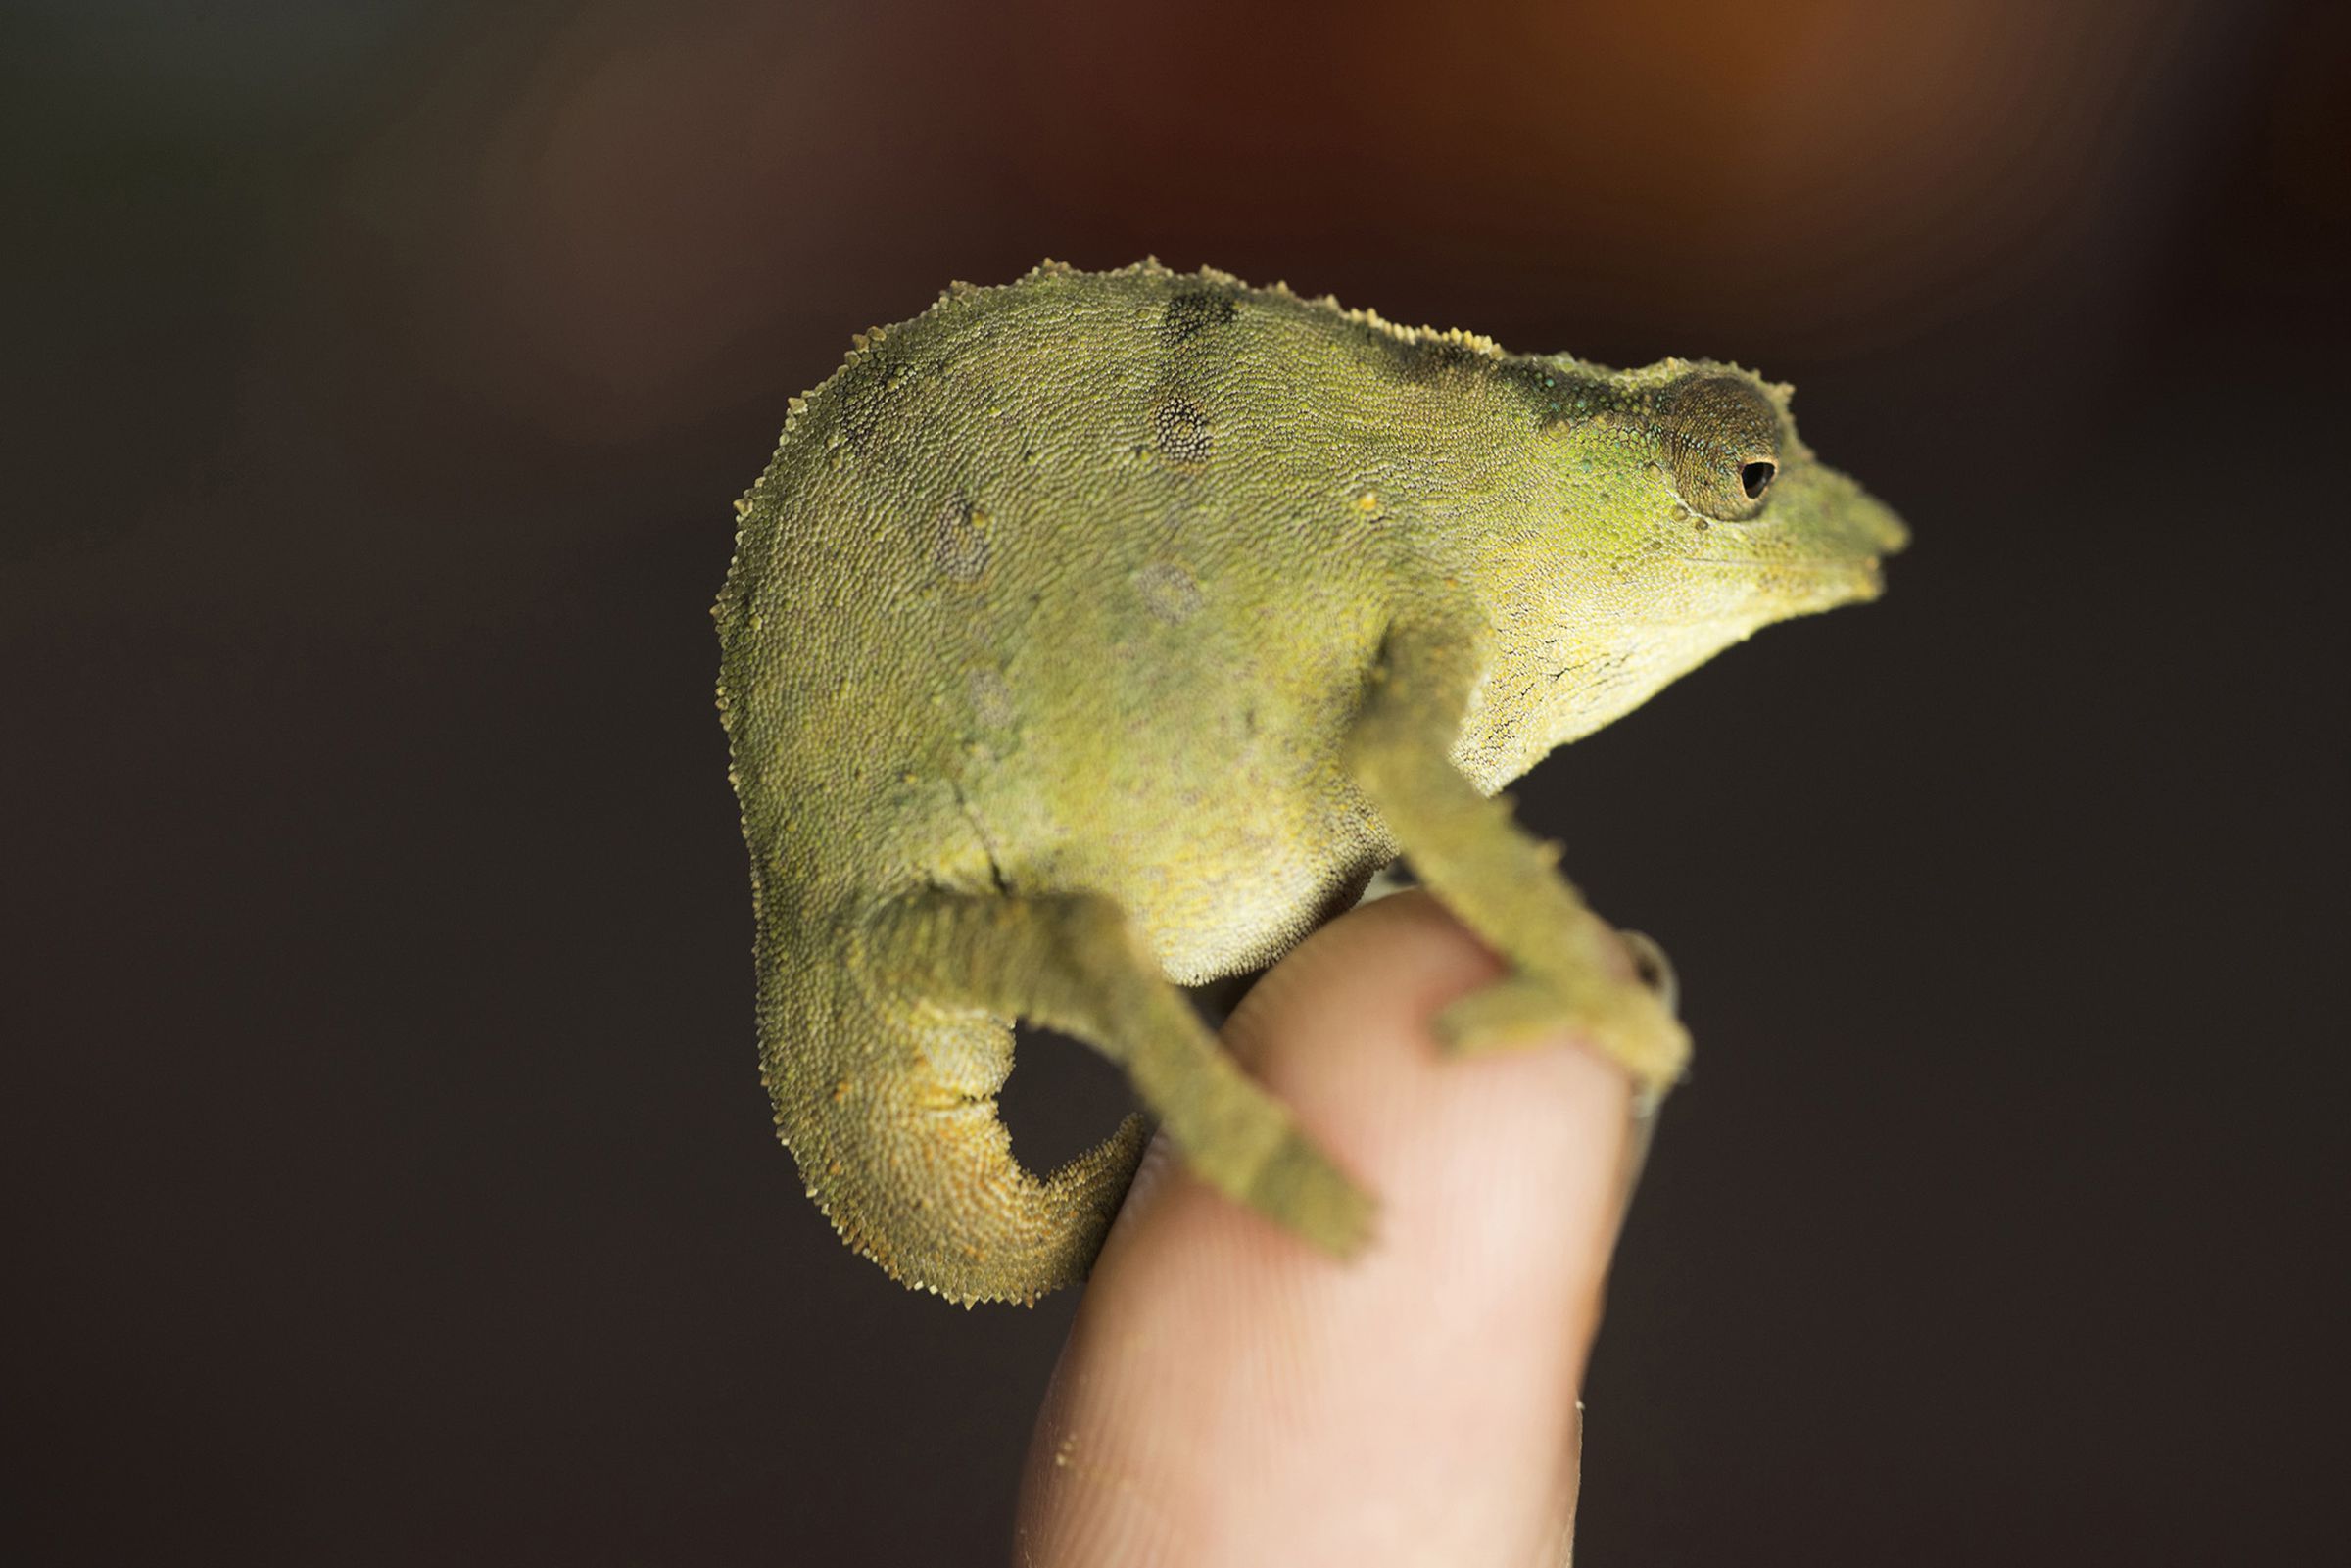 A Rhampholeon, or Dwarf Chameleon, found during the expedition in another forest on nearby Mount Socone.